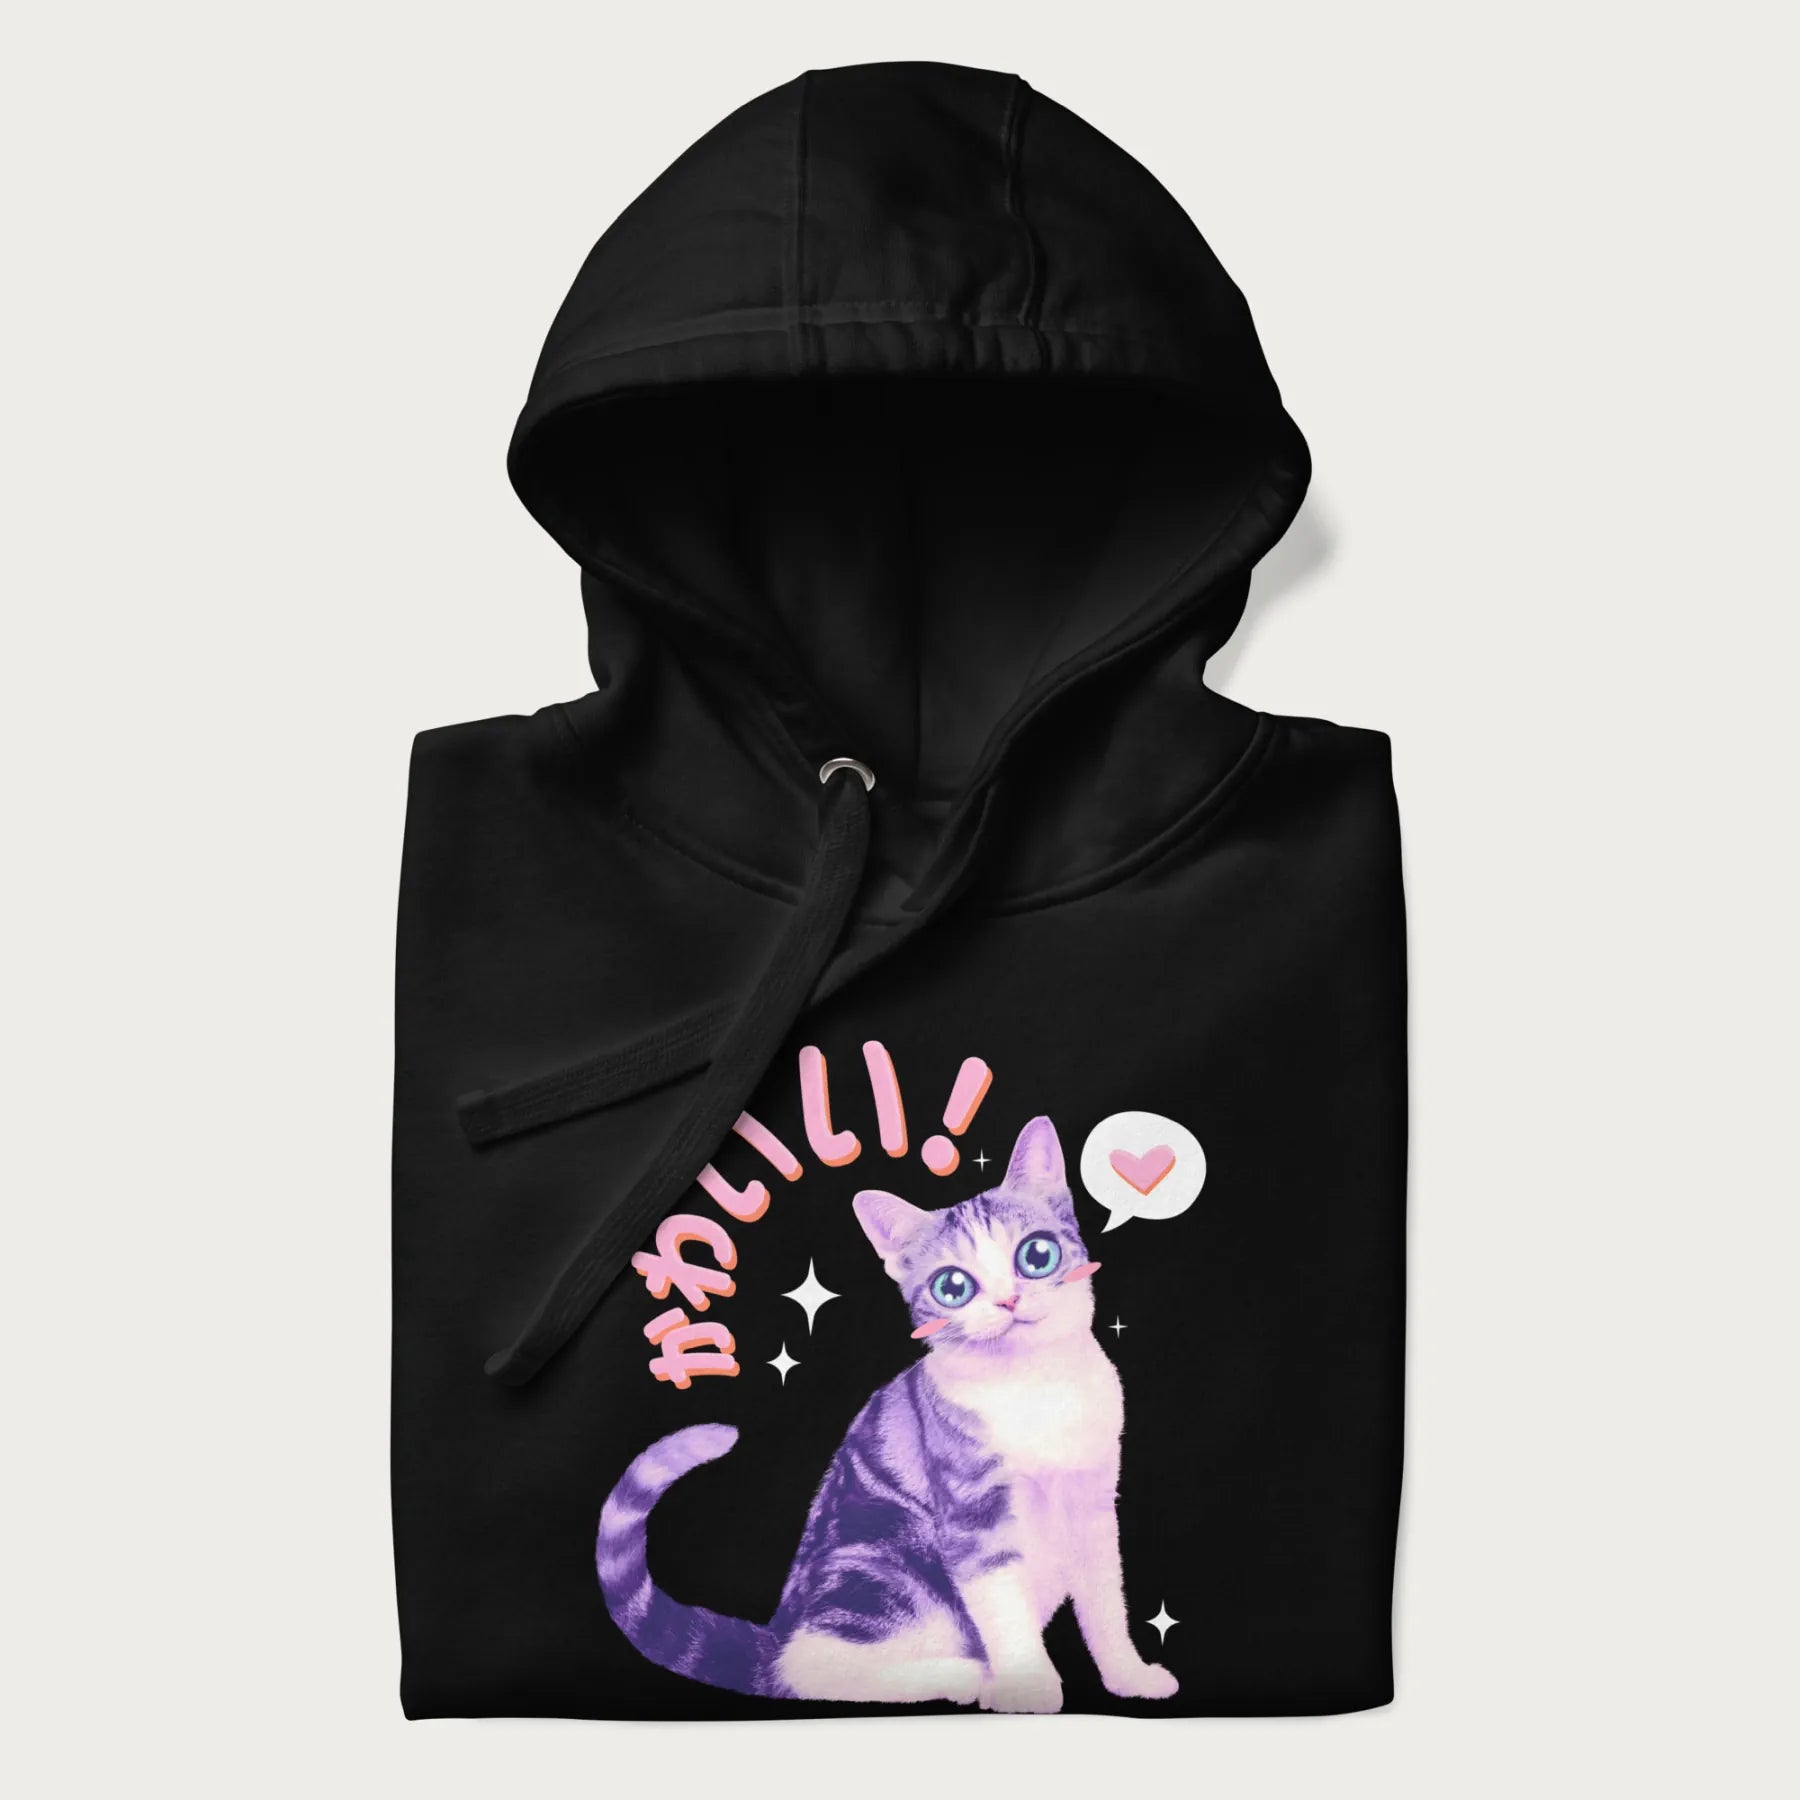 Folded black hoodie with a graphic of a blue-eyed kitten and Japanese kawaii-style lettering, stars, and a heart.